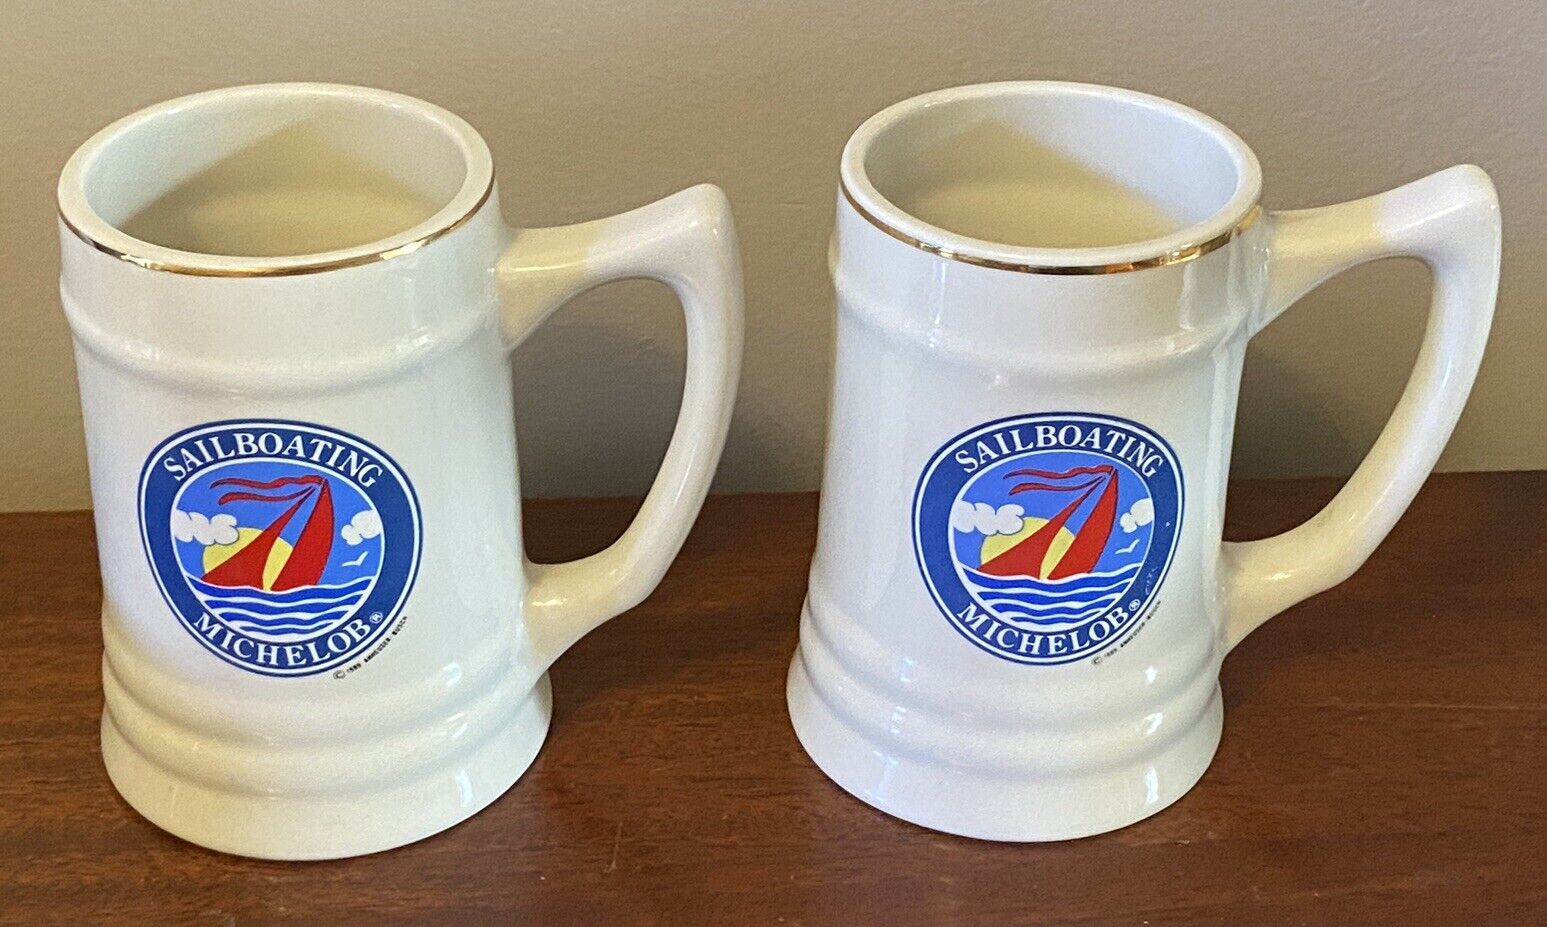 2 Vtg 1989 Michelob Sailboating Mugs Cups Steins - Sail Boating Anheuser-Busch